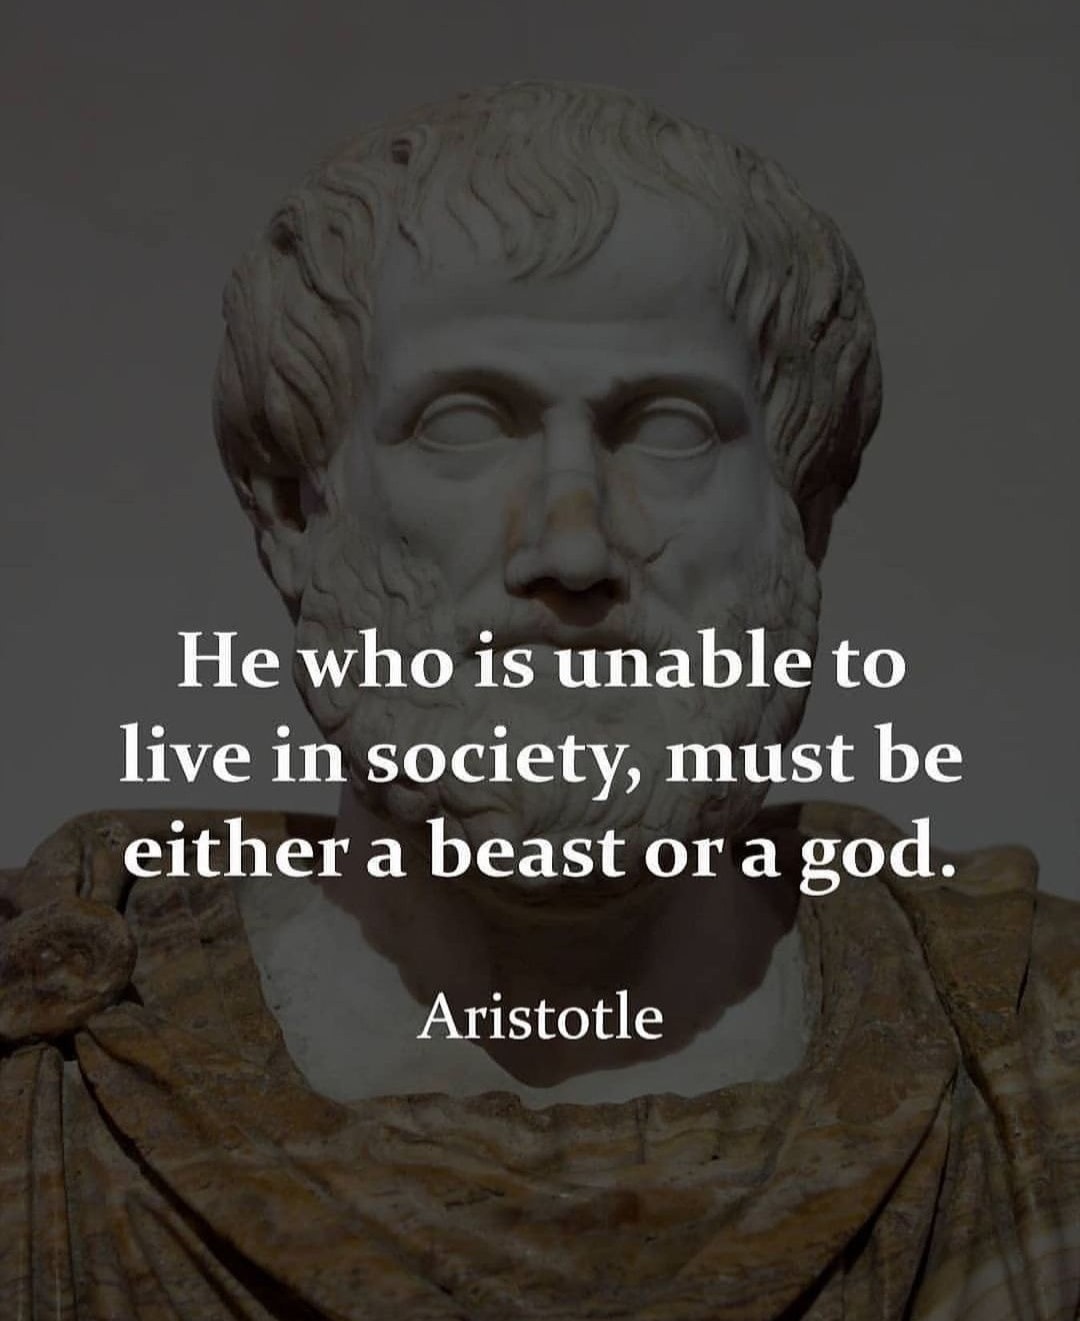 He who is unable to live in society, must be either a beast or a god. – Aristotle